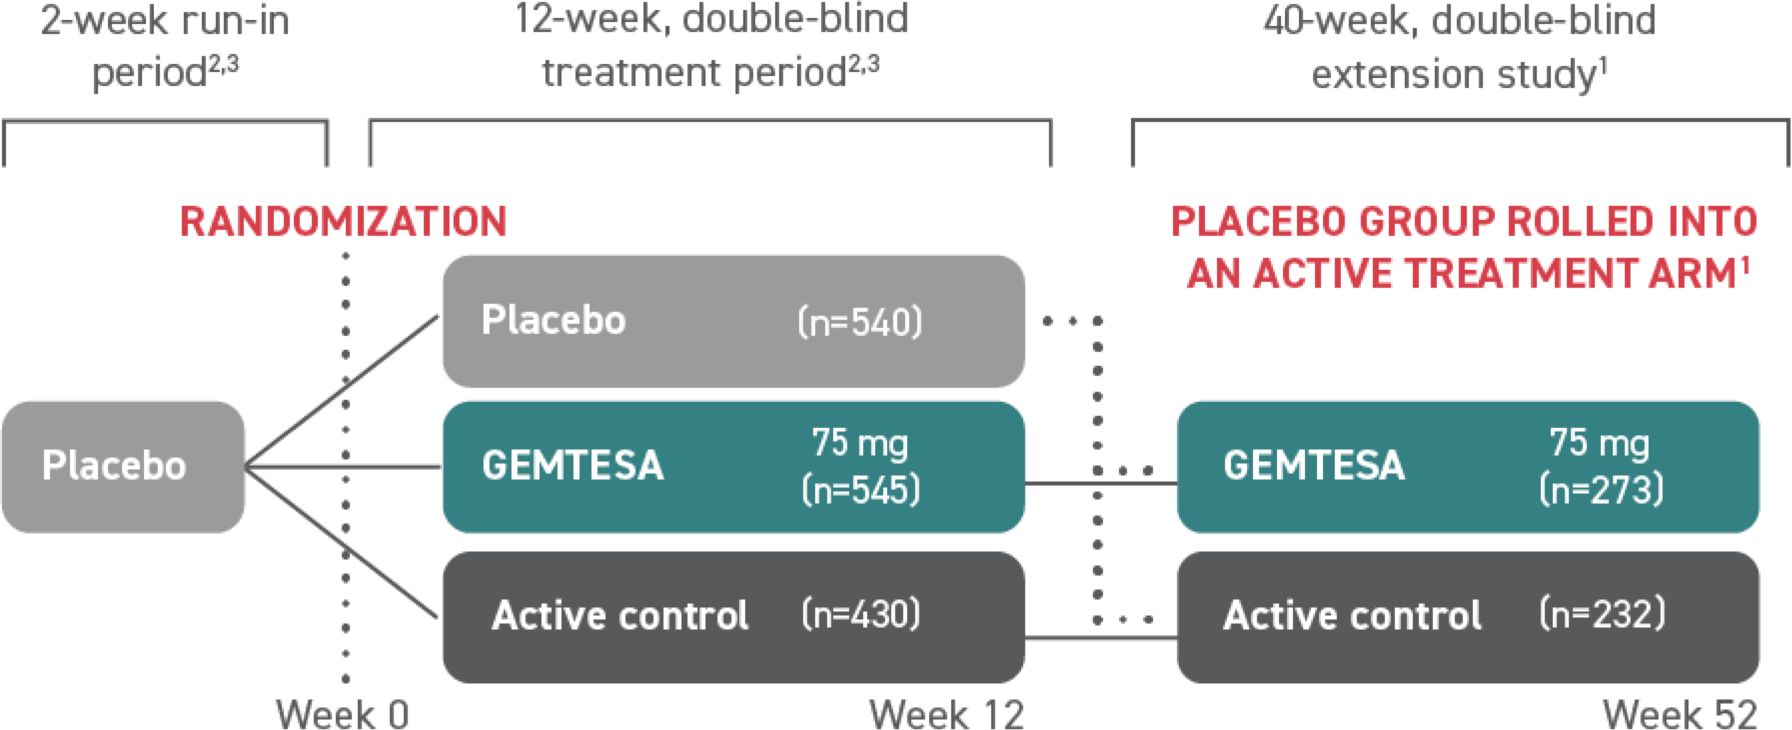 Diagram showing the structure of the GEMTESA® extension study. Over 500 patients participated in the extension study.